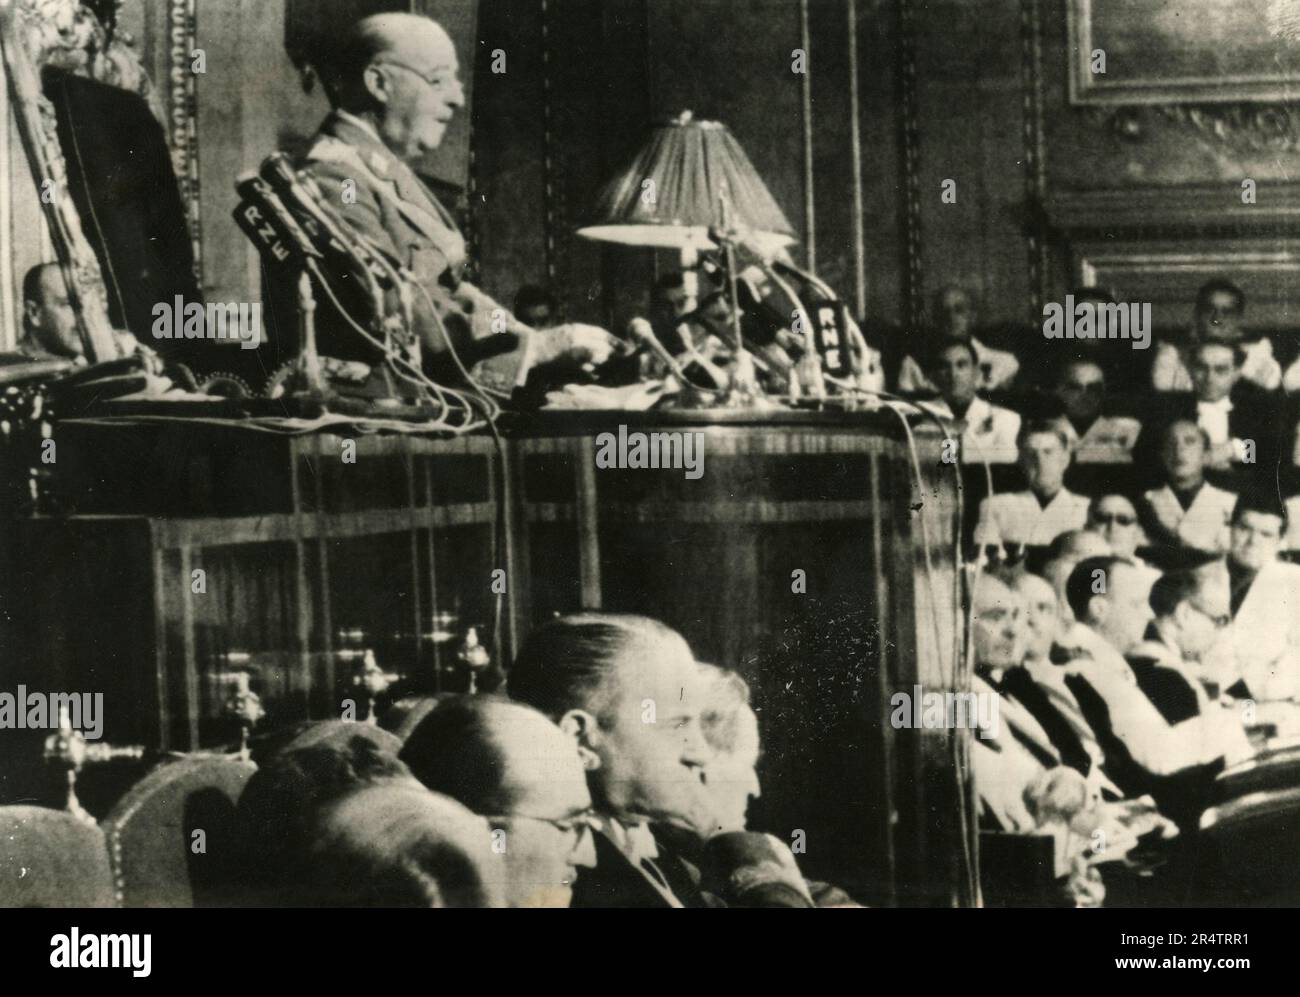 Spanish Head of State Generalissimo Francisco Franco during a speech at the Parliament, Madrid Spain 1966 Stock Photo